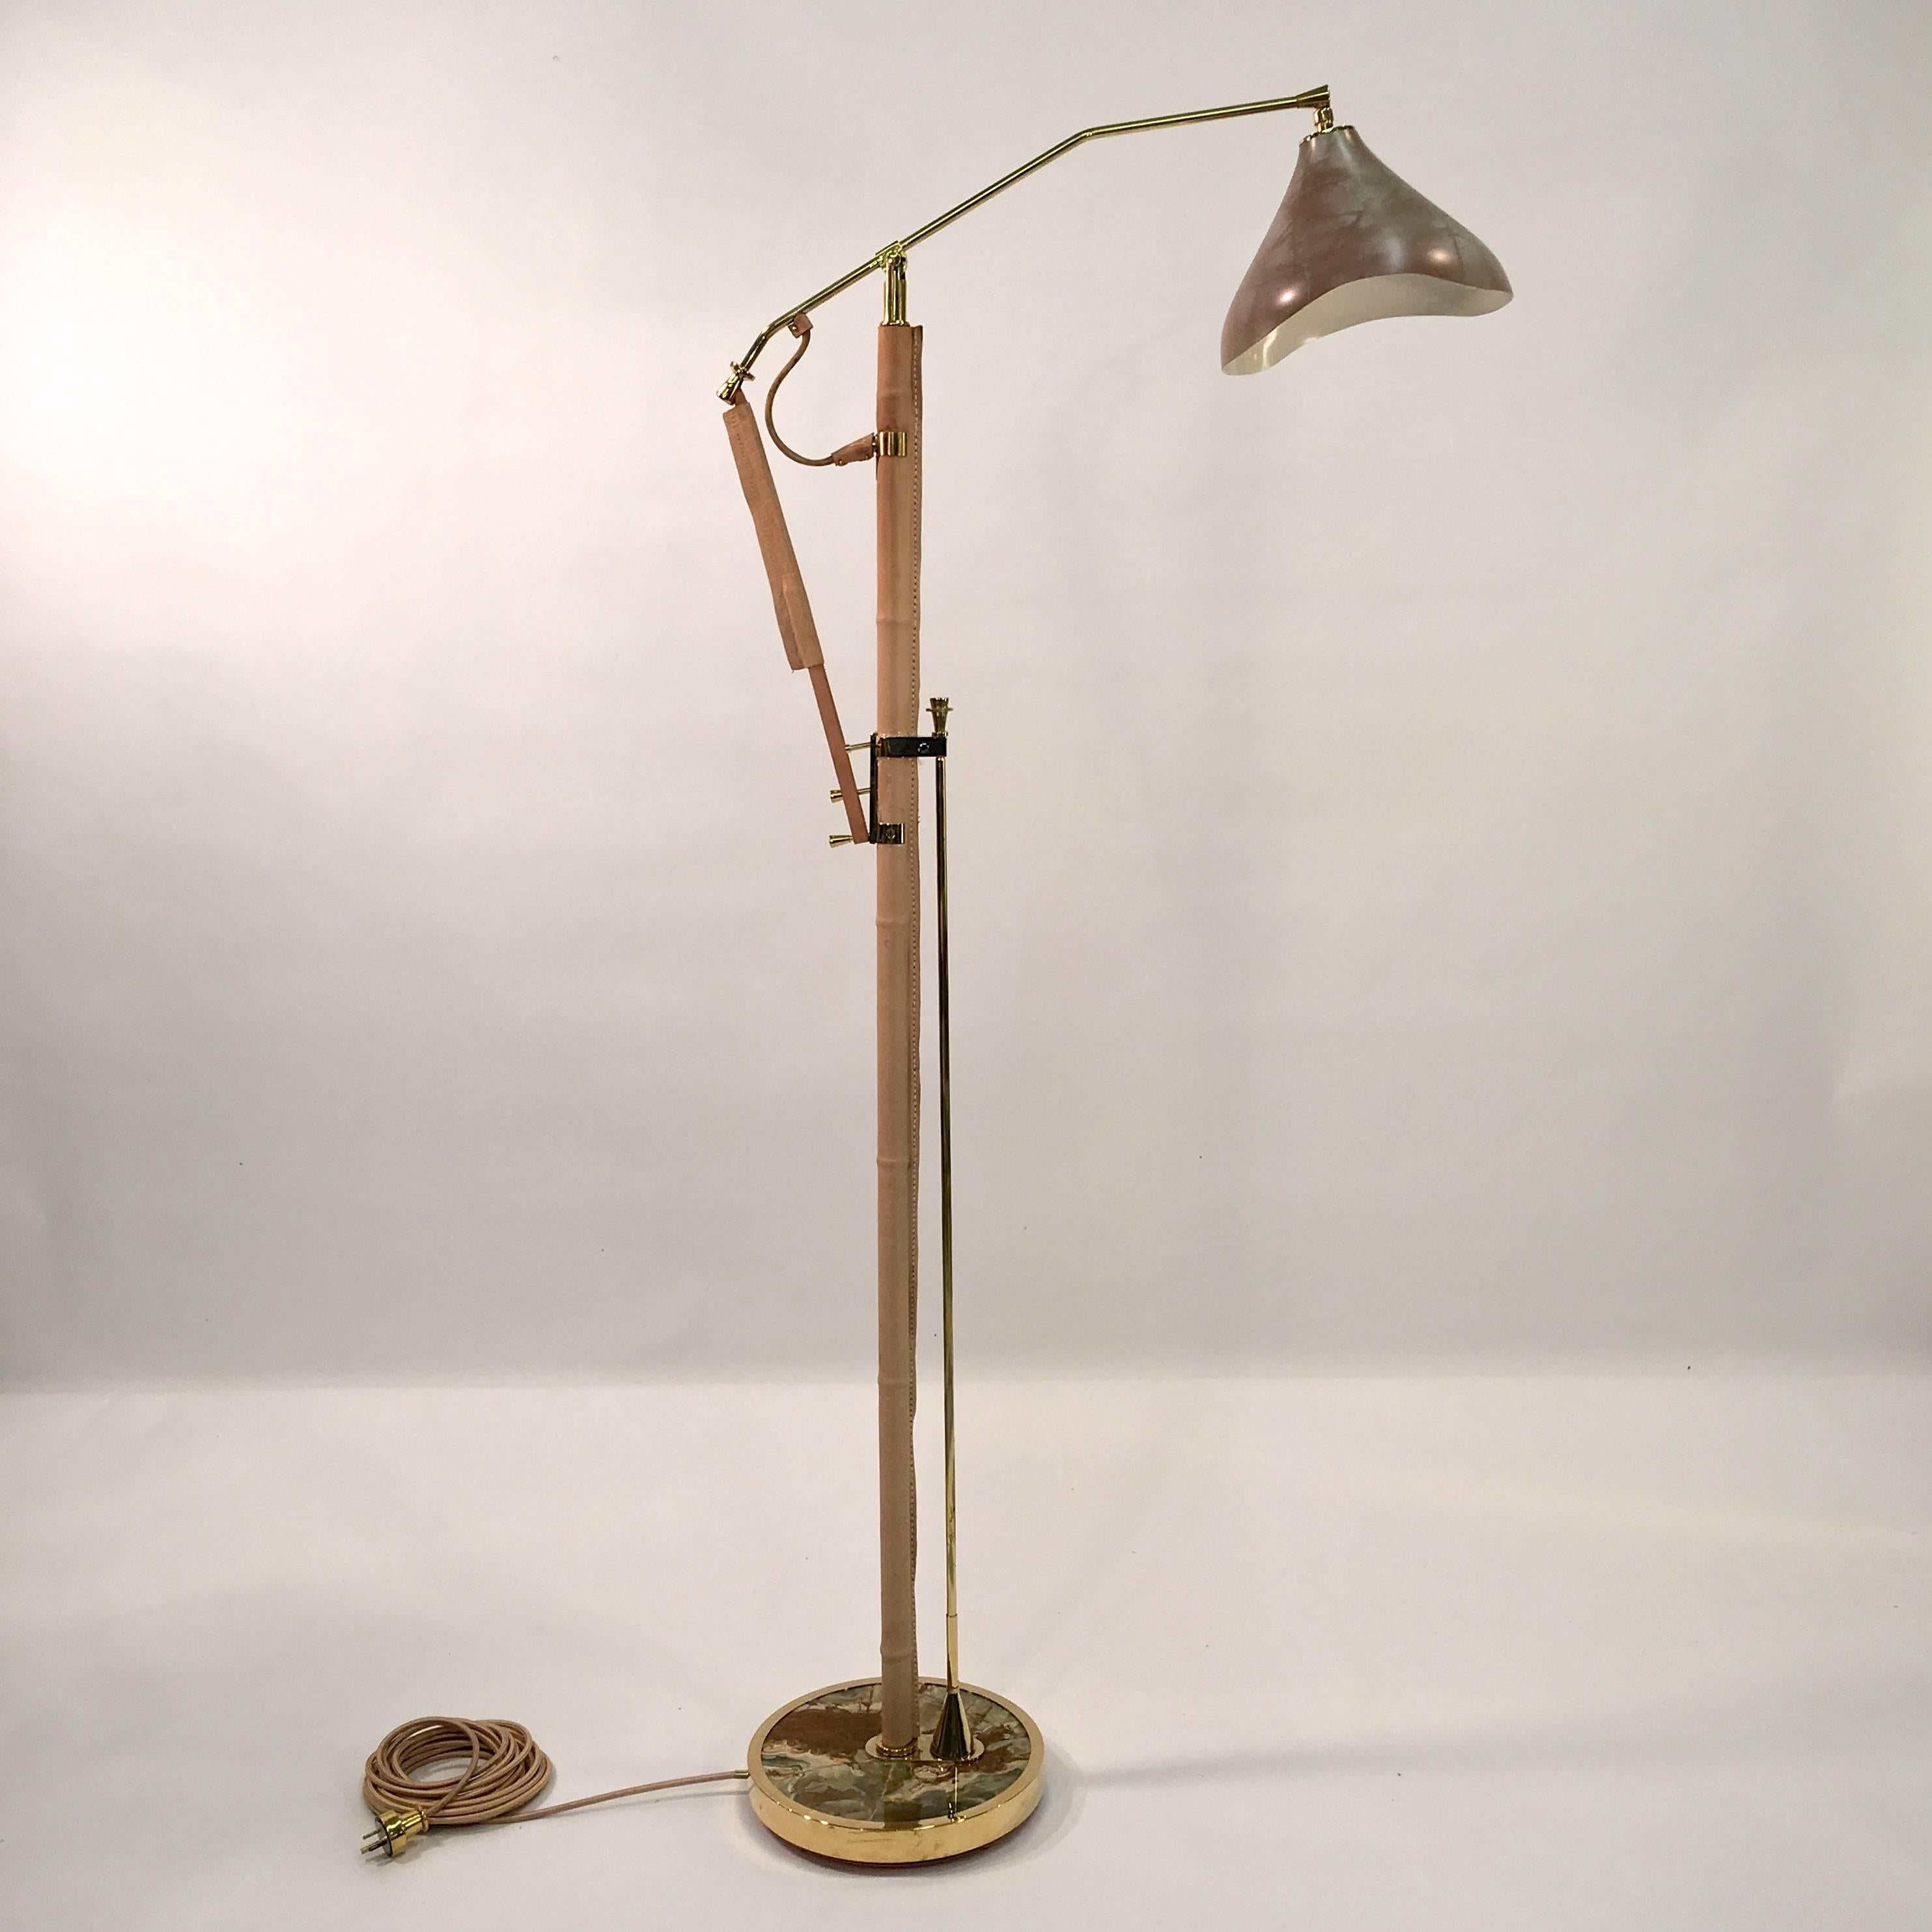 This floor lamp is a prototype, every element of which is hand made by our own master artisans in our studio to the highest standards of a bygone era. 

Inspired by 1950s French and Italian design, you will note the influences of Jacques Adnet and